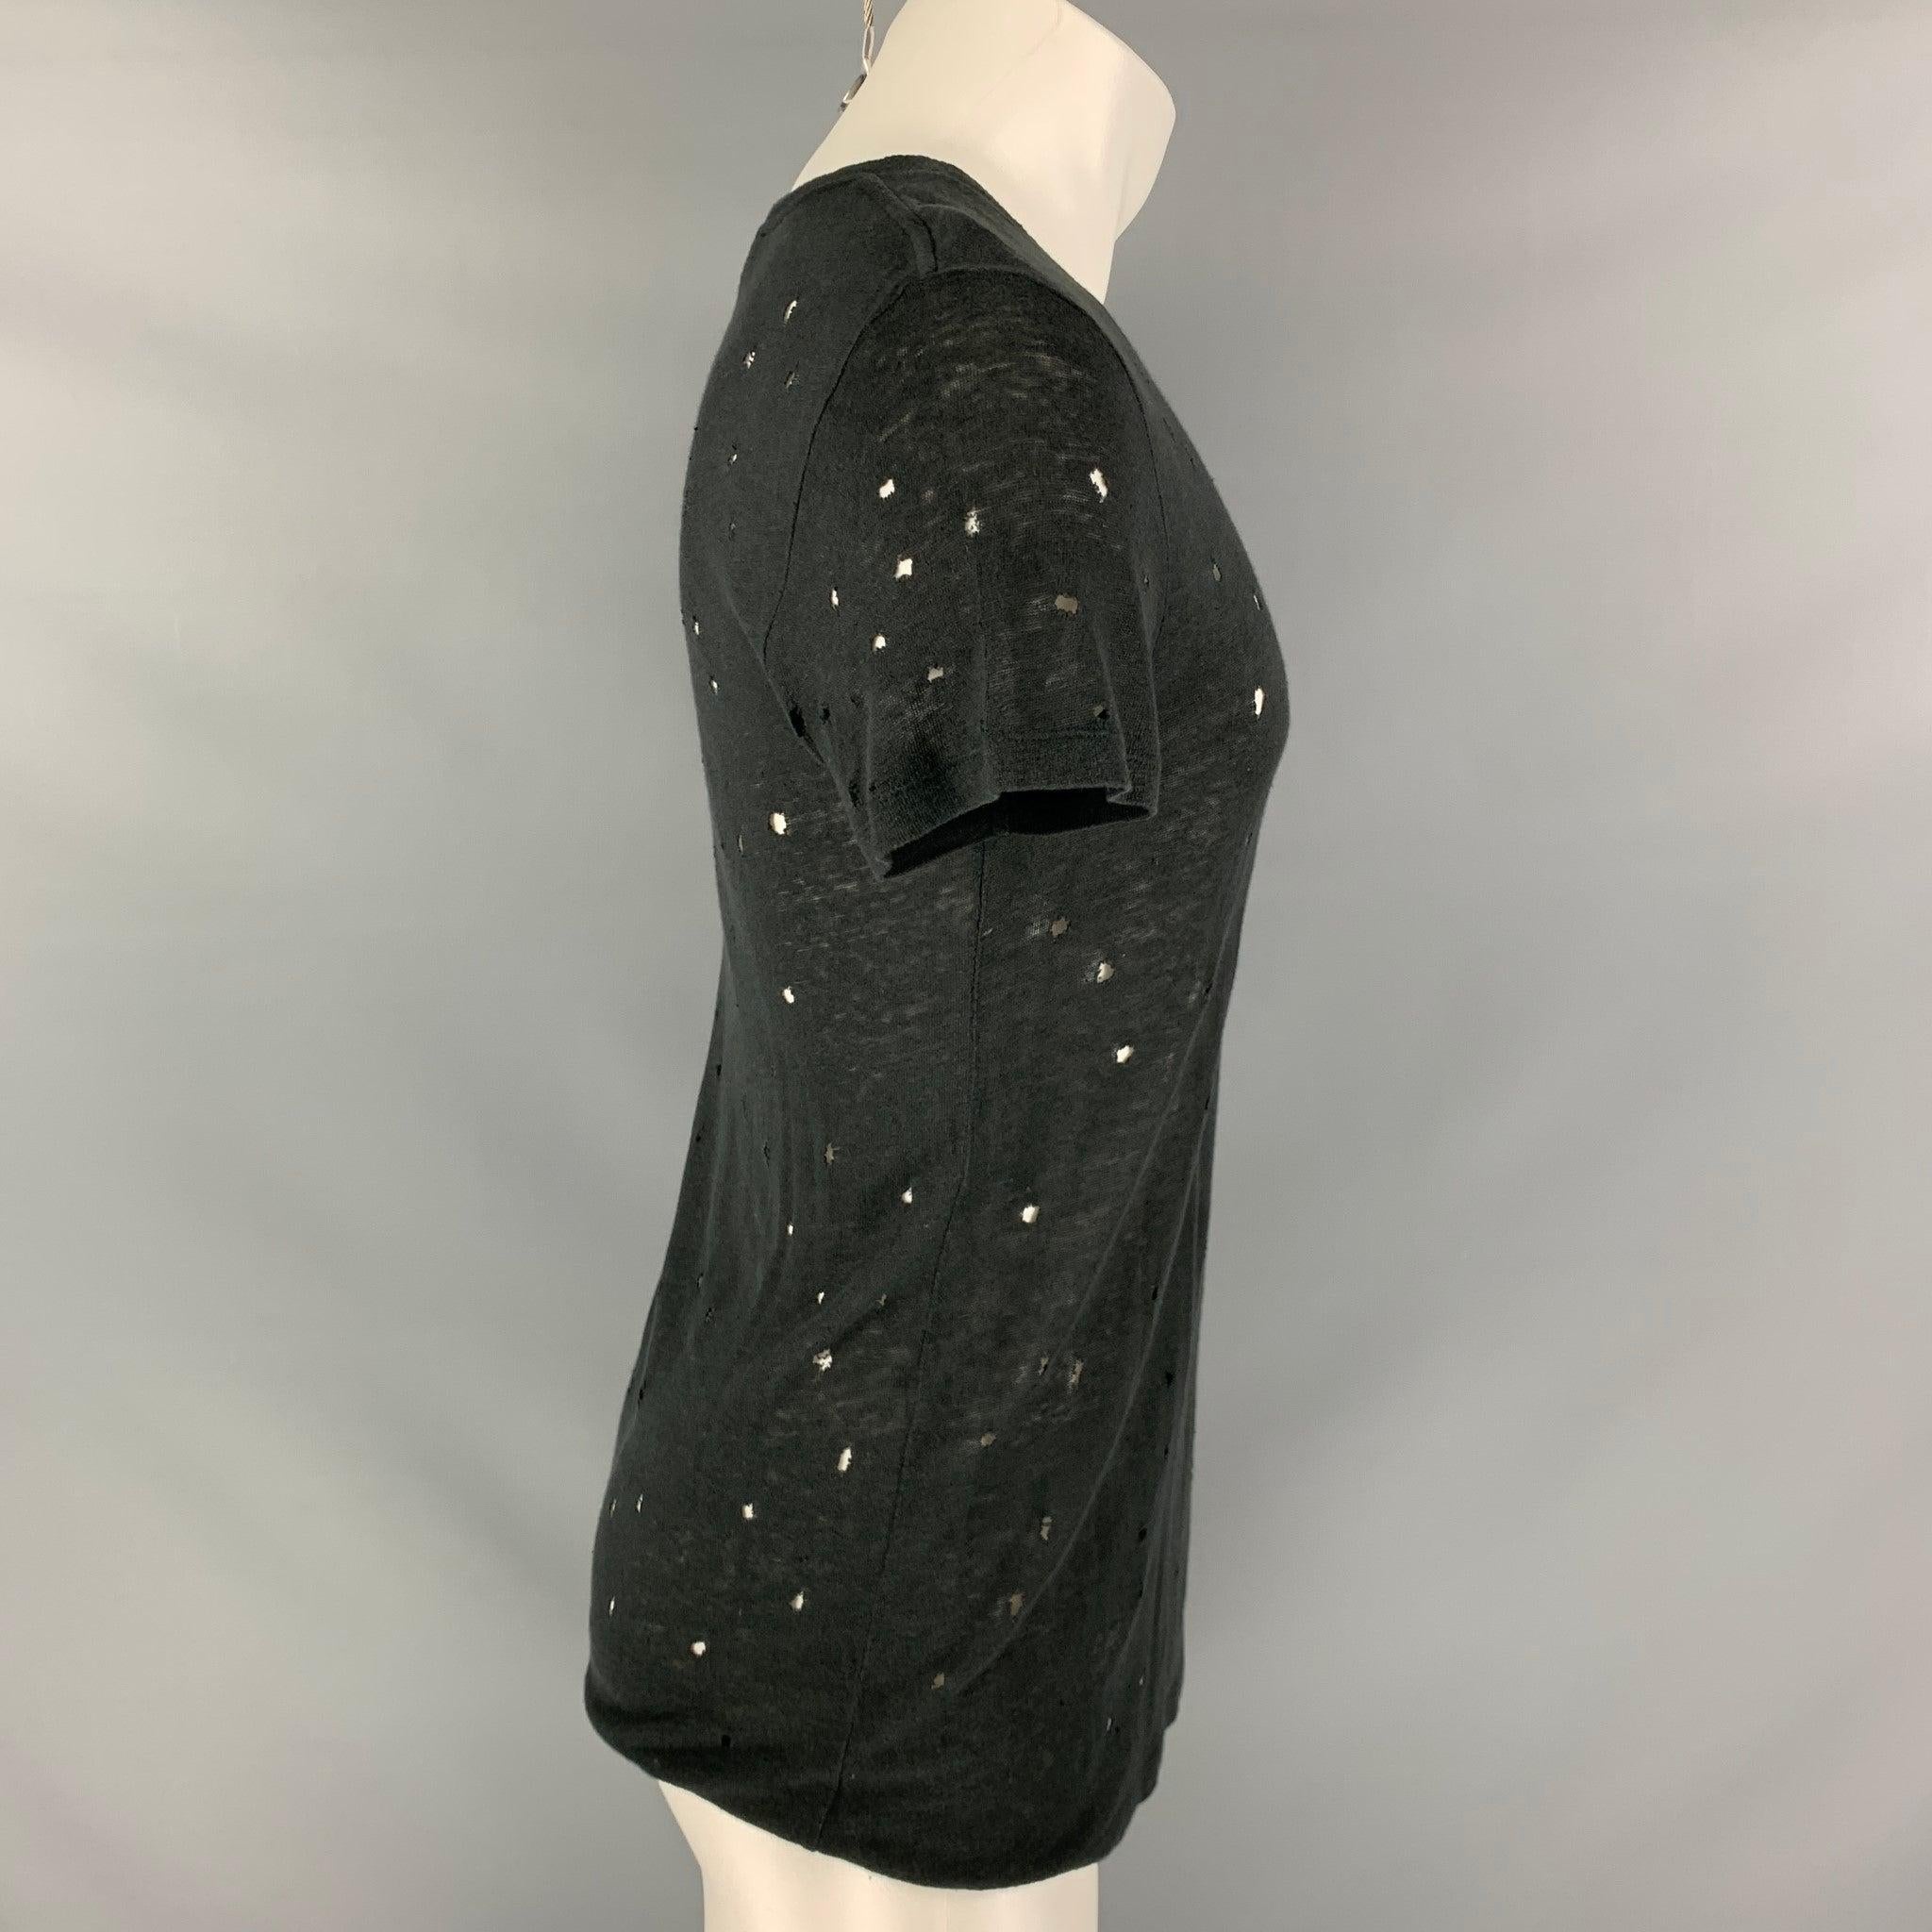 IRO 'Clay' t-shirt comes in a black linen featuring distressed details throughout and a crew-neck. Made in Portugal.Very Good Pre-Owned Condition. 

Marked:   XS 

Measurements: 
 
Shoulder: 18 inches Chest: 46 inches Sleeve: 8 inches Length: 26.5